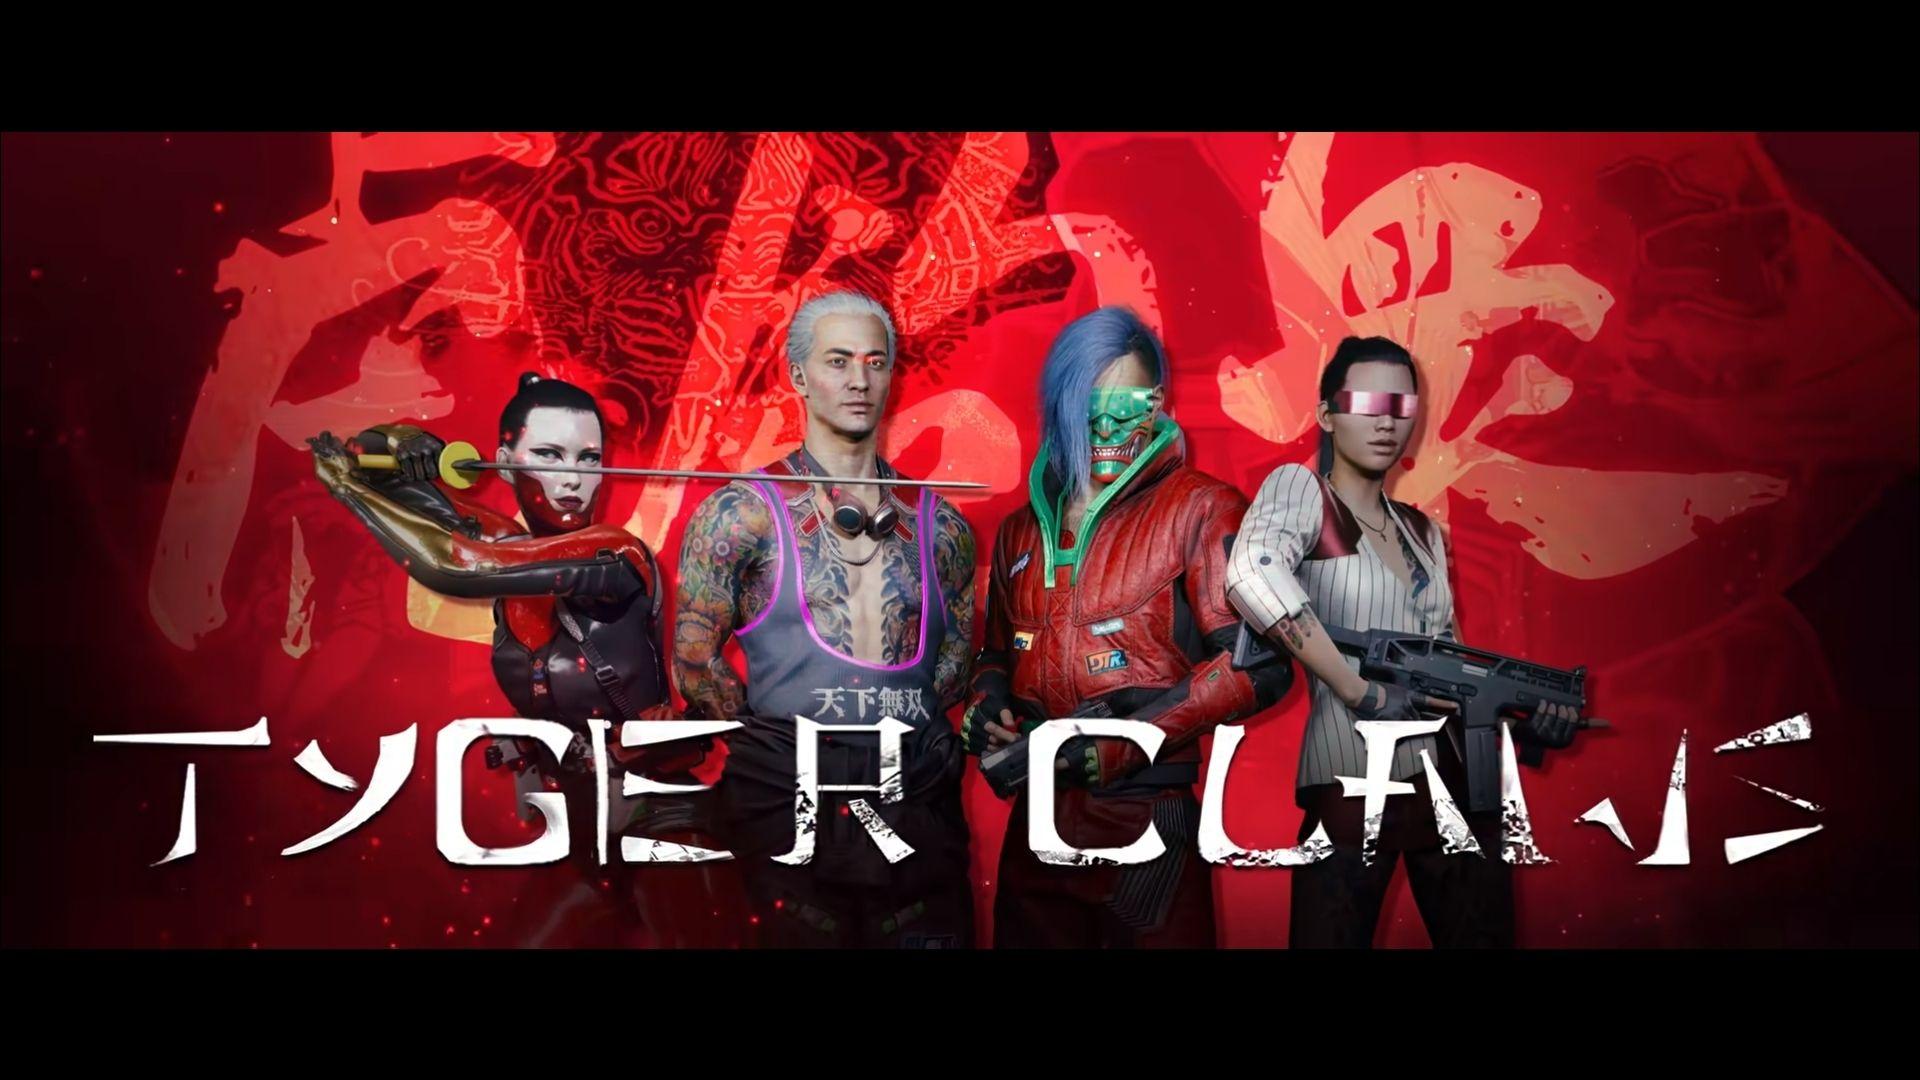 The Tyger Claws gang in Cyberpunk 2077